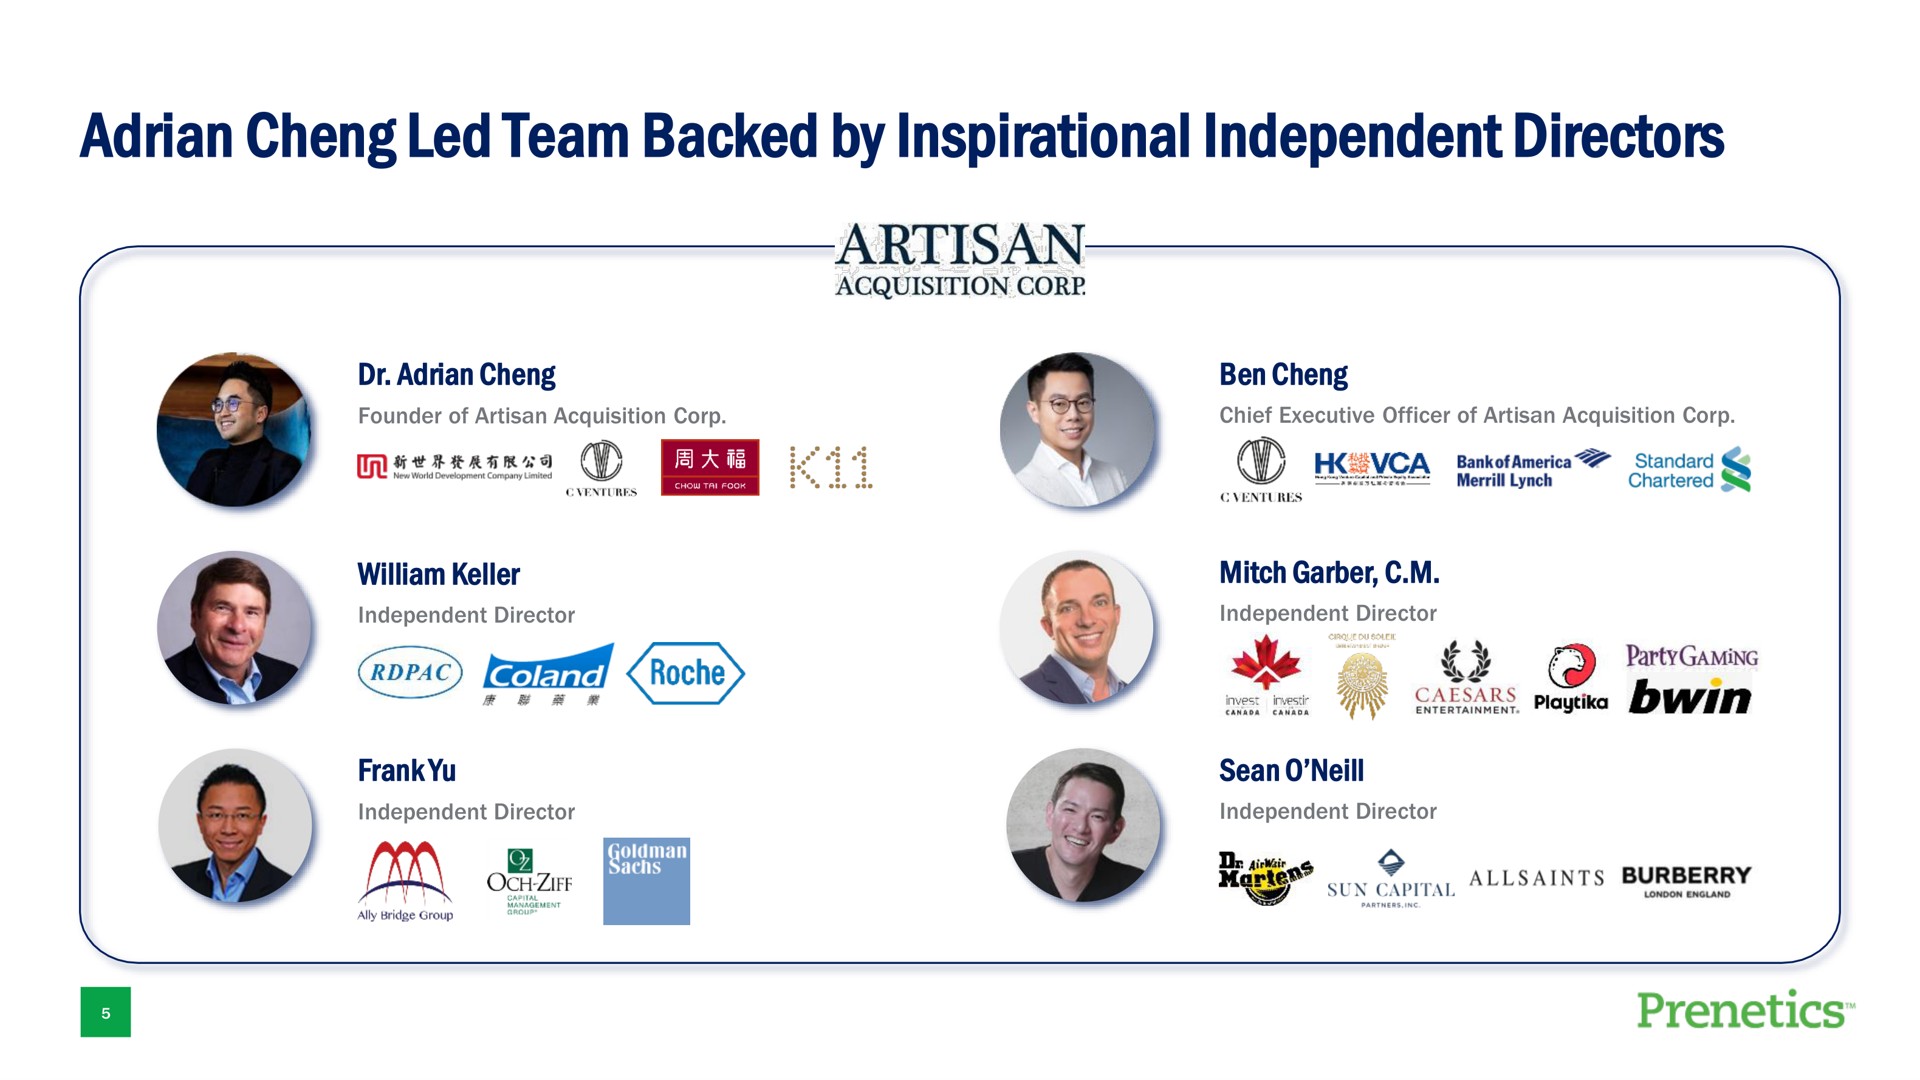 cheng led team backed by inspirational independent directors | Prenetics